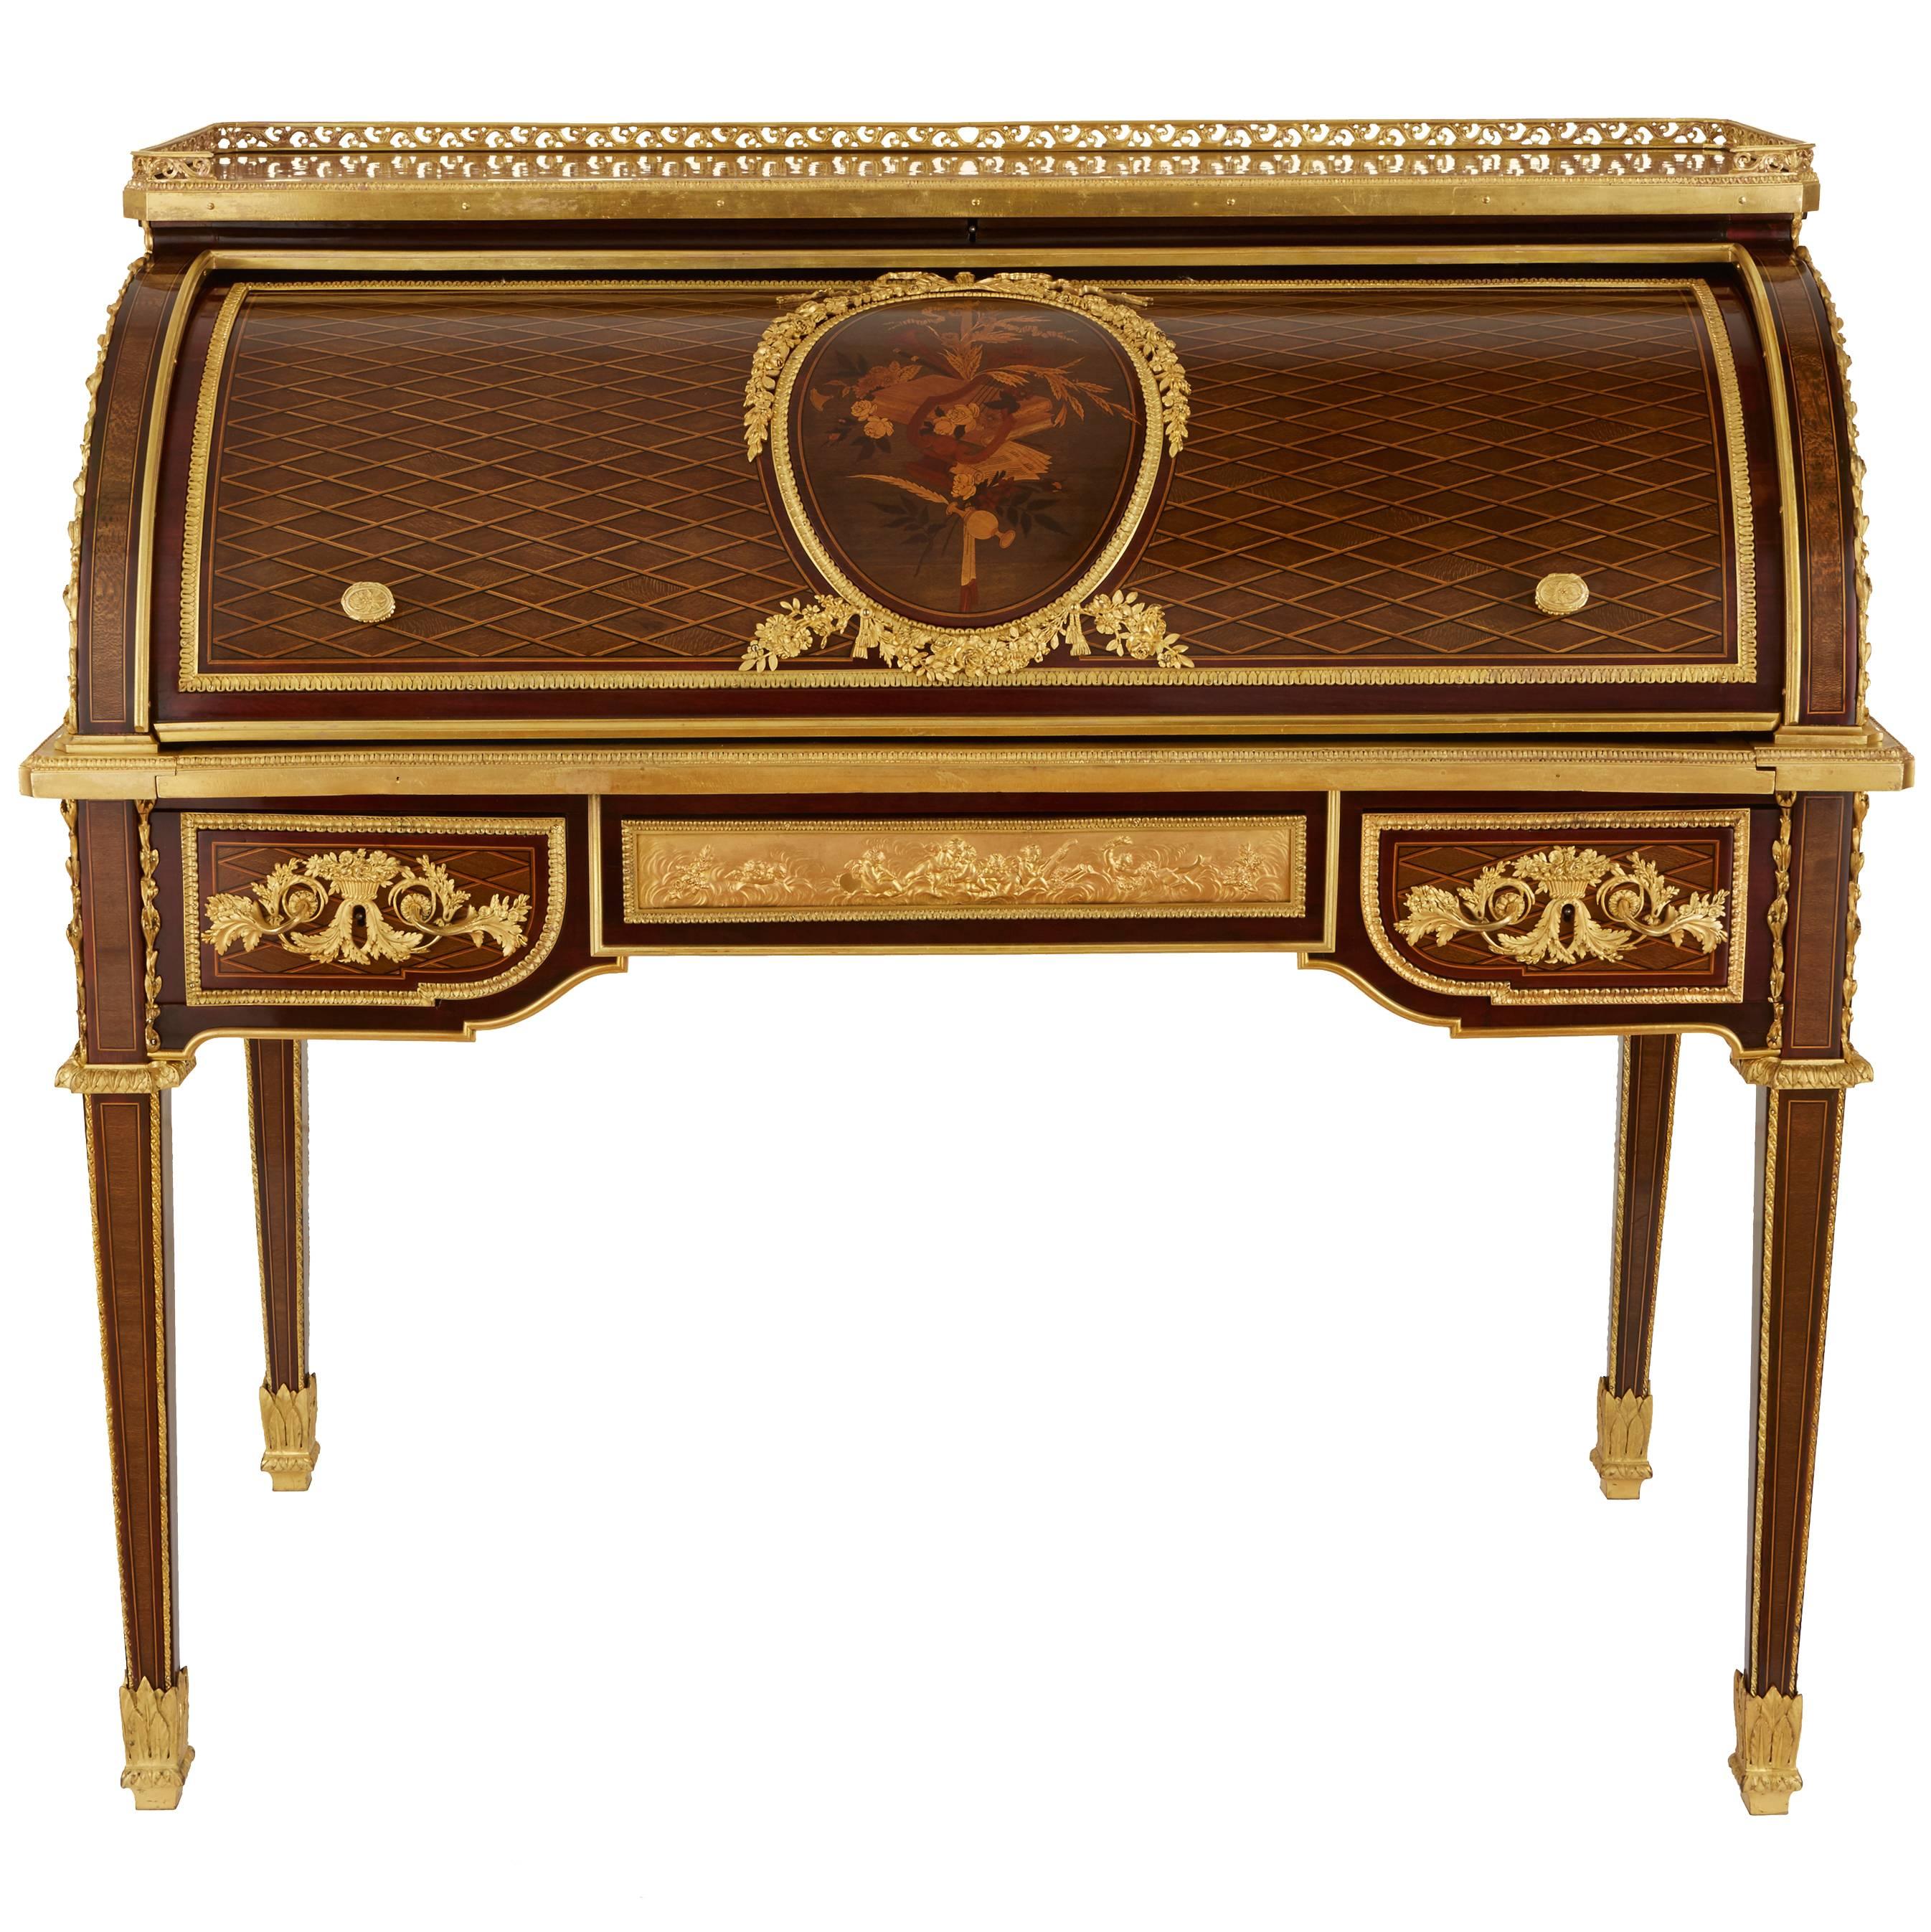 Ormolu-Mounted Marquetry Roll-Top Desk Attributed to P. Bernard